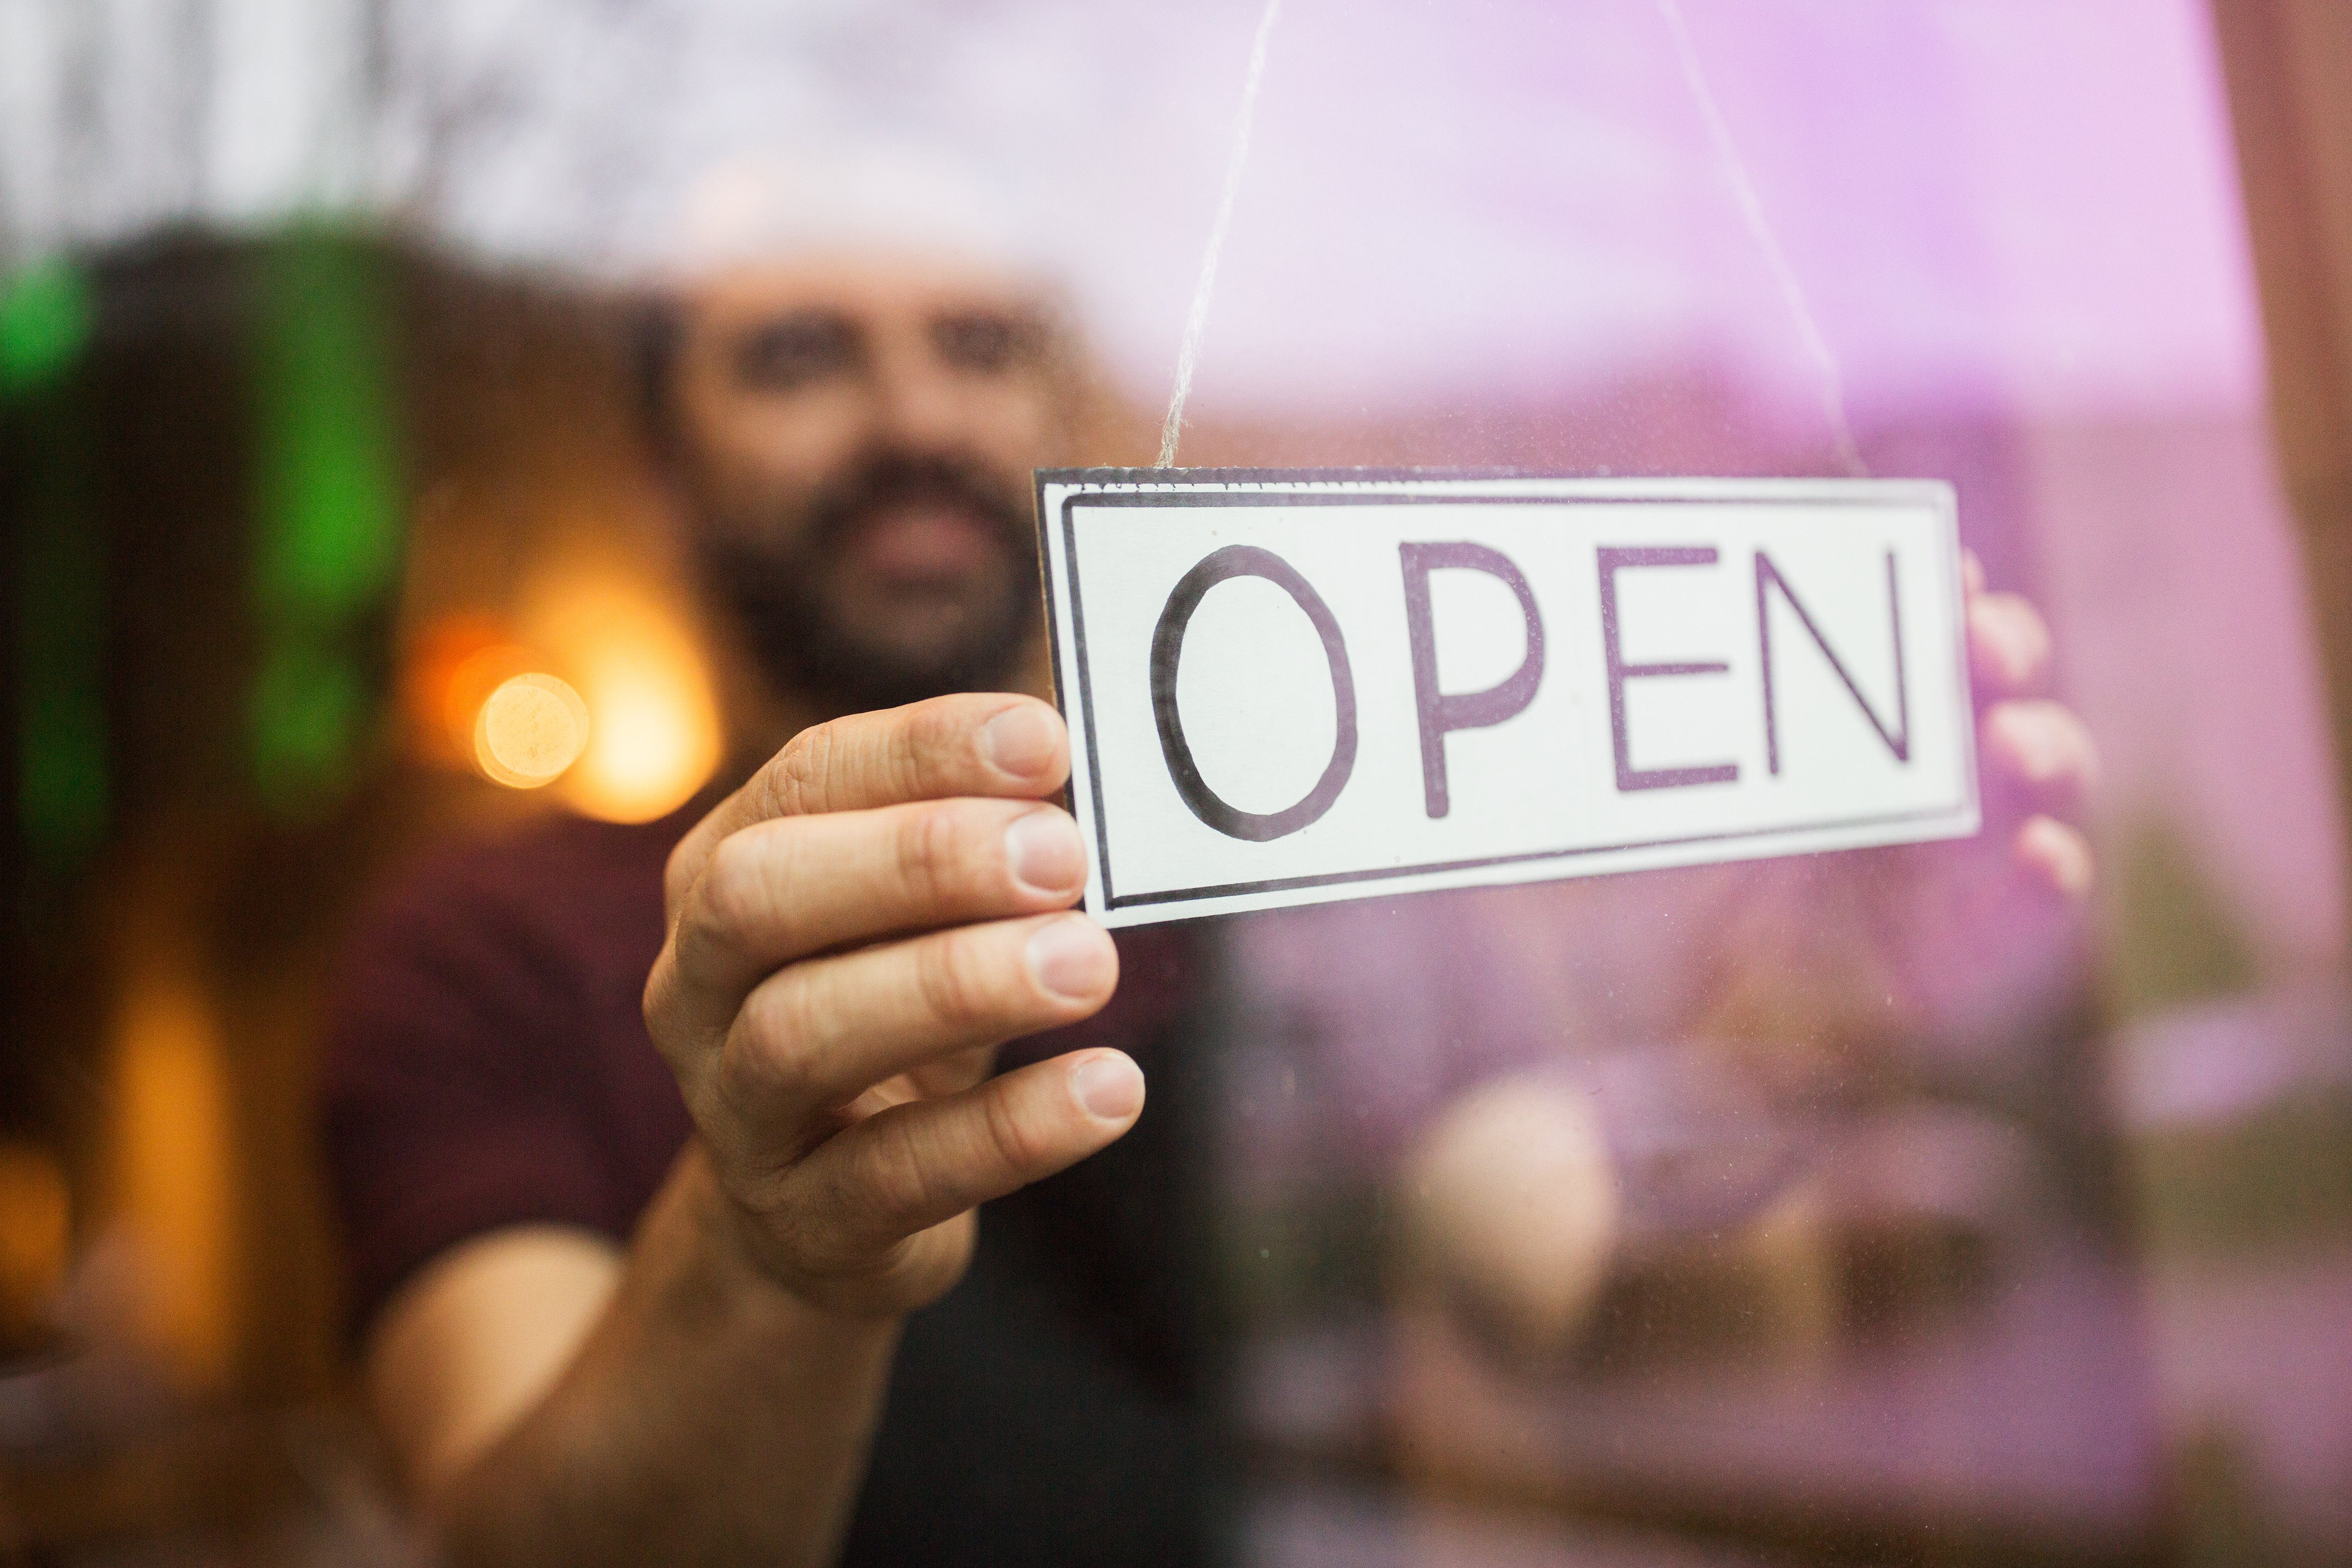 4 tips to open a successful restaurant business